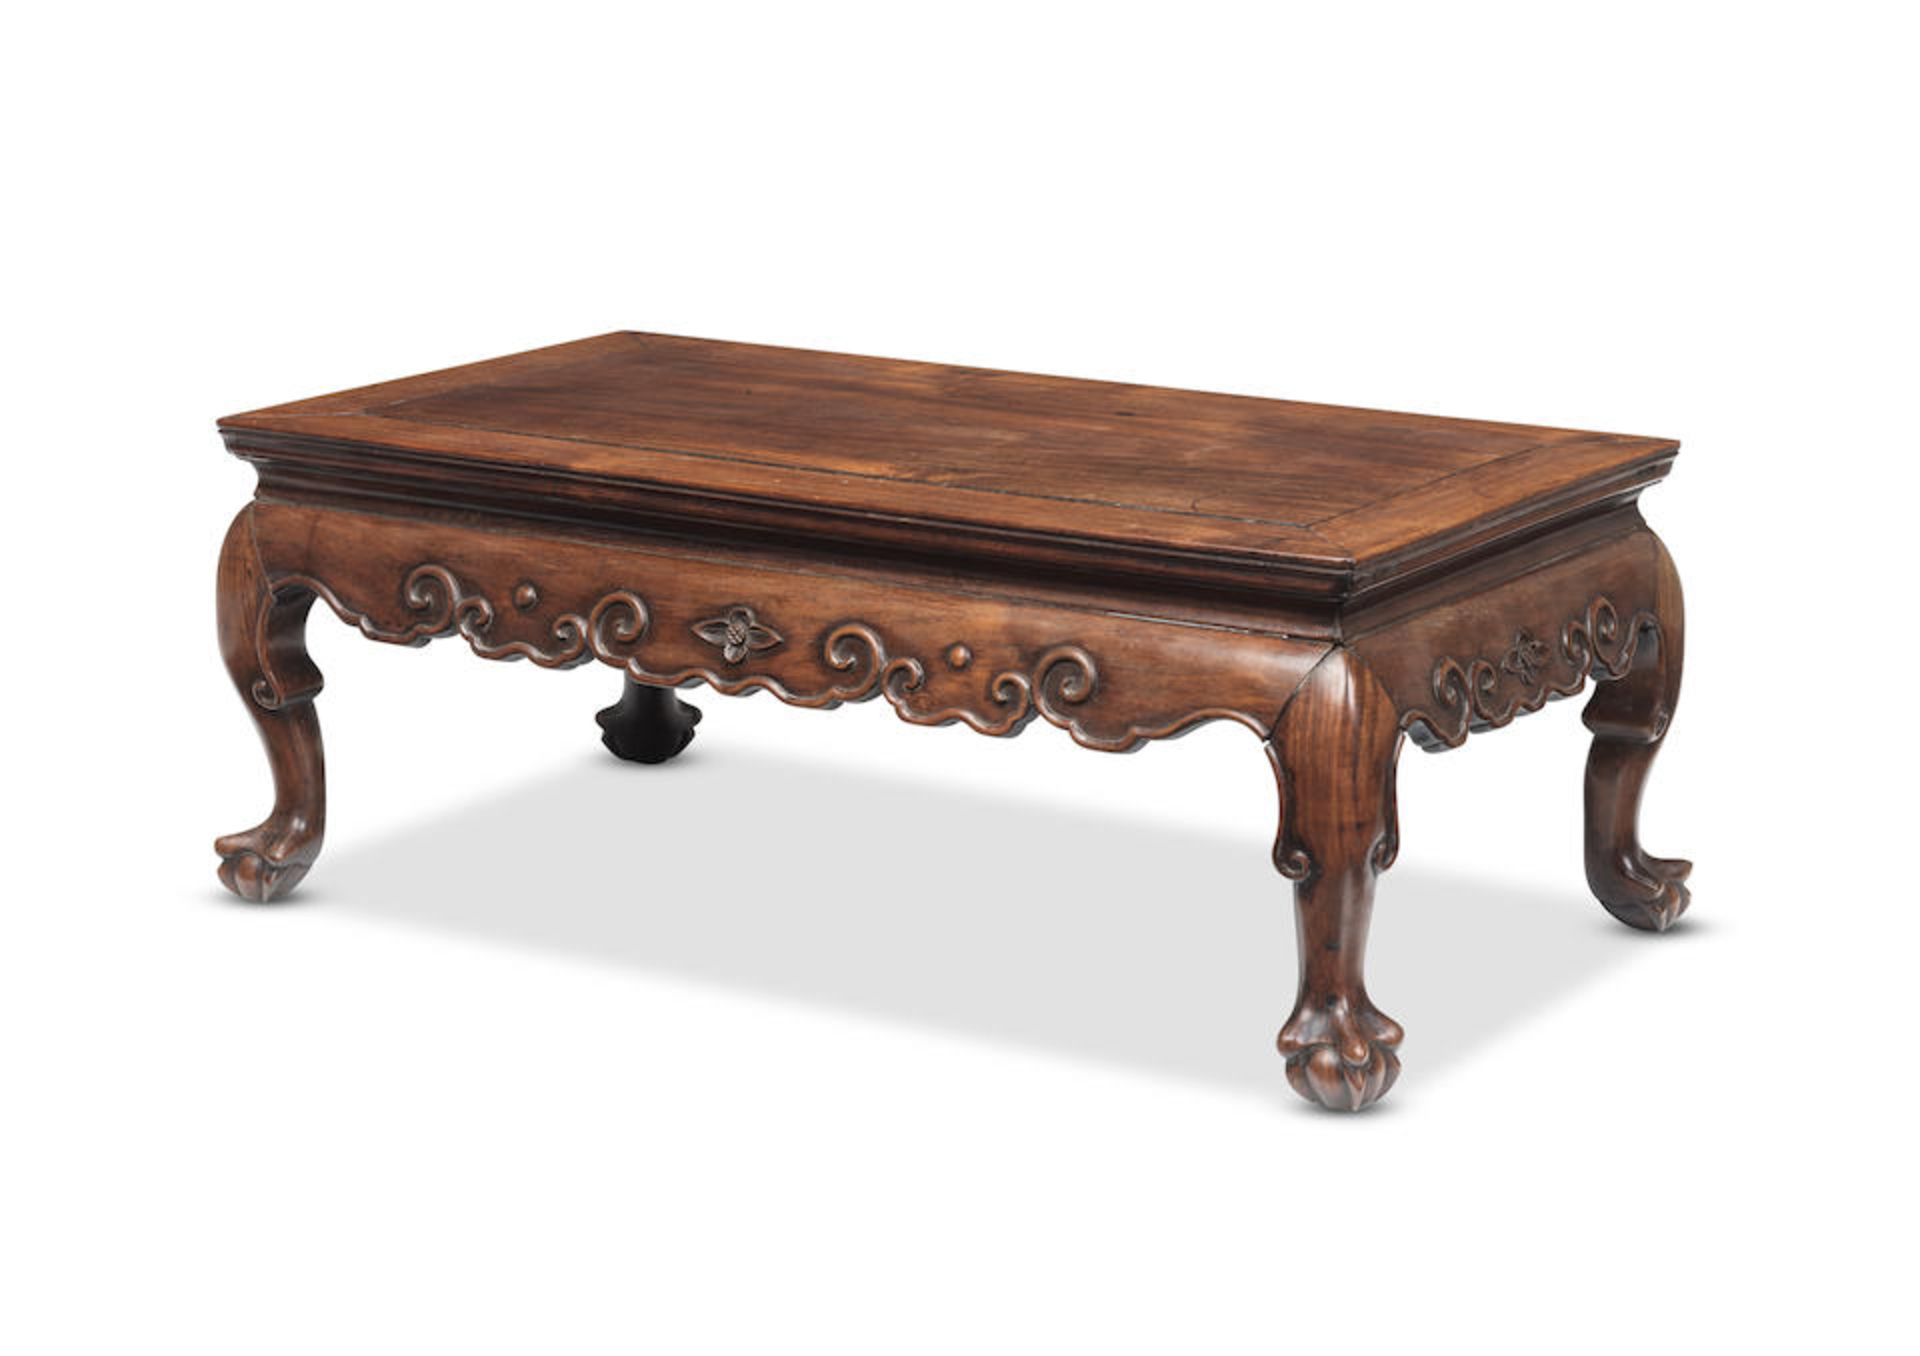 A HUANGHUALI KANG TABLE 19th century